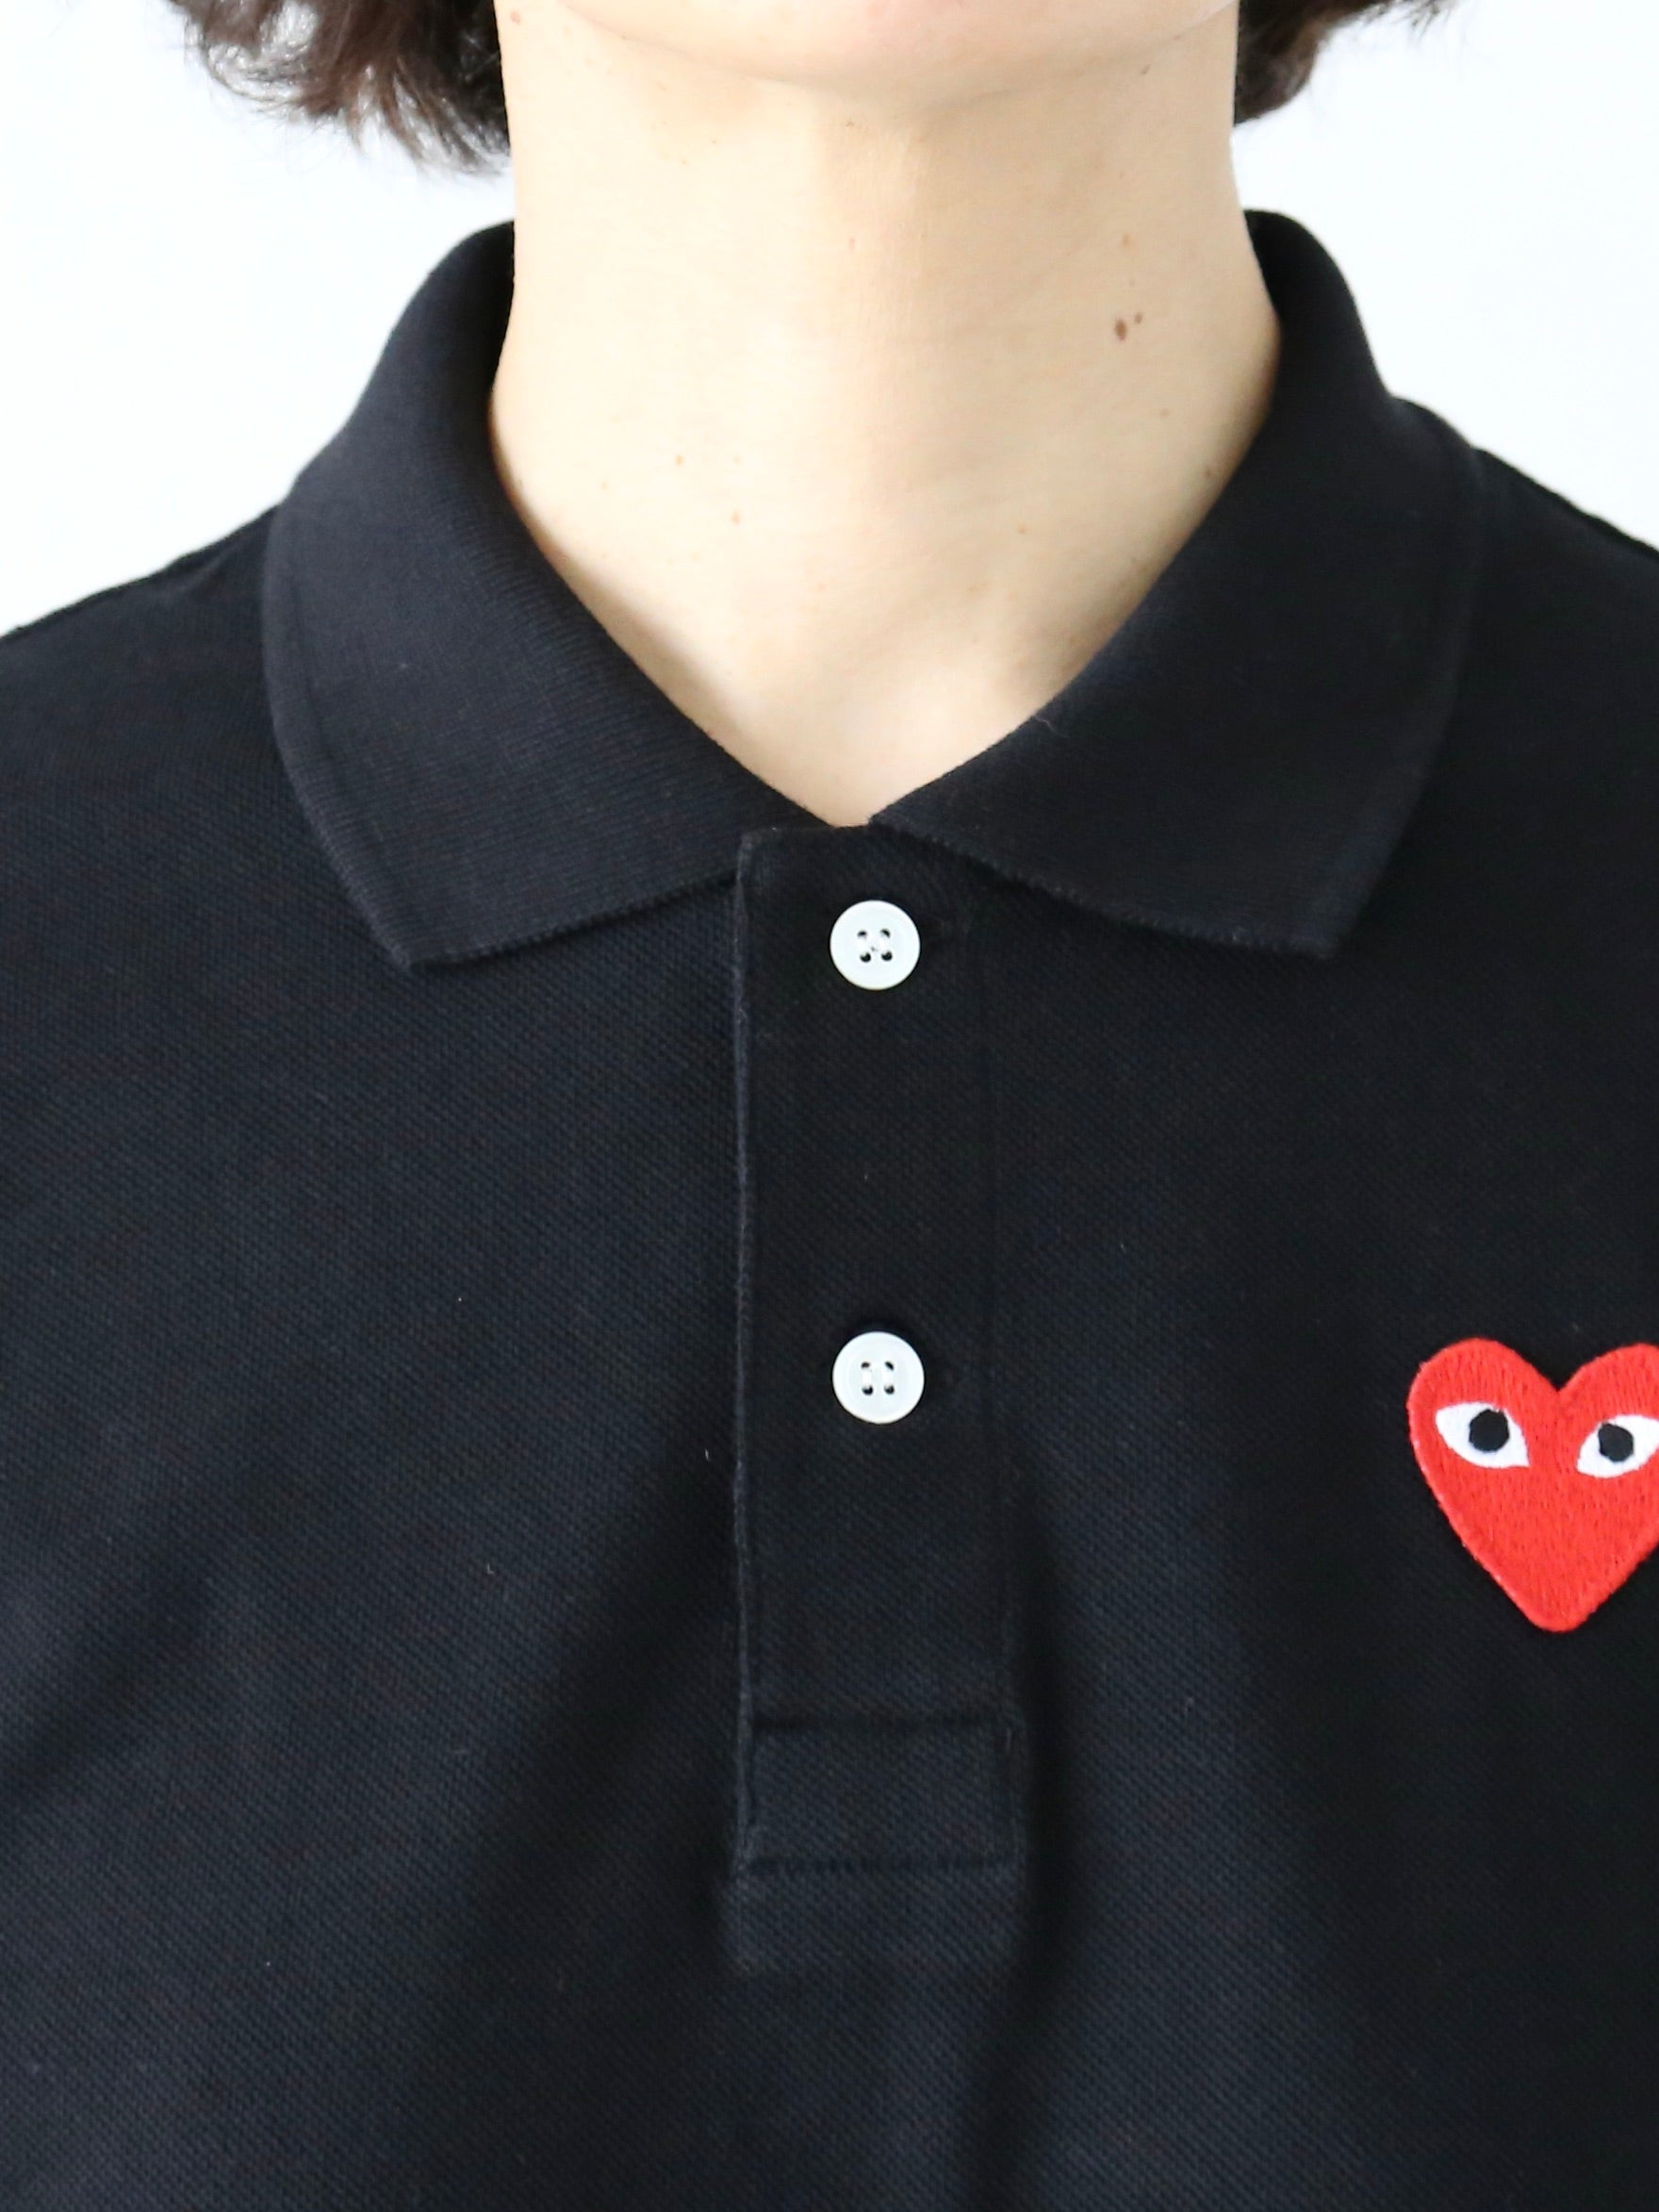 PLAY COMME des GARCONS ポロシャツ(ブラック×レッド) [AX-T006-051]